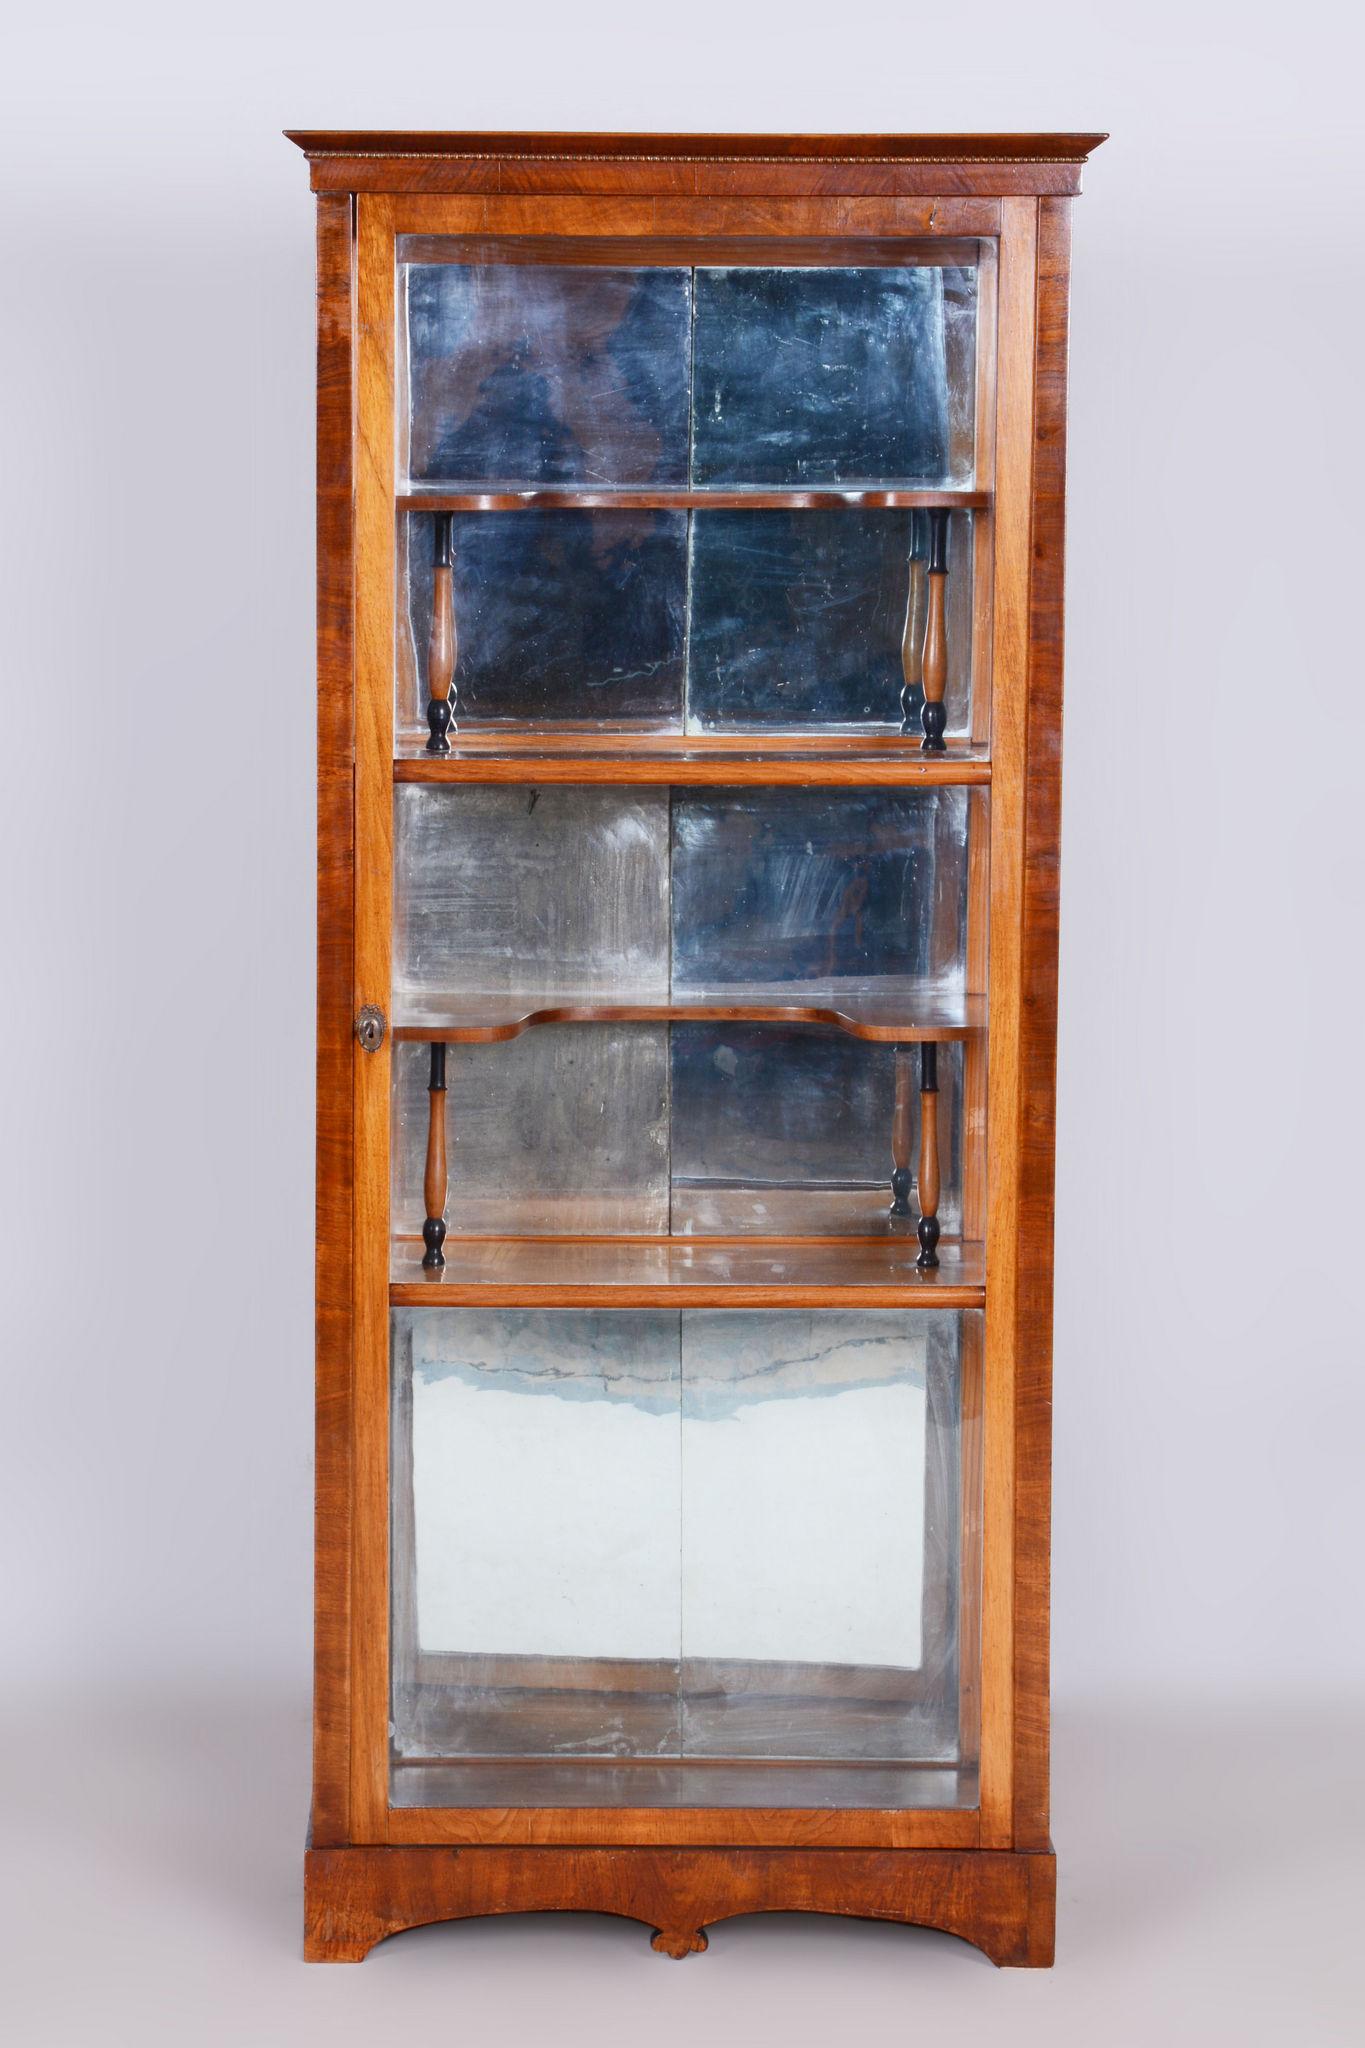 Restored Biedermeier 1-door display cabinet.

Period: 1830-1839
Source: Czechia
Material: Walnut, Solid Spruce, Glass
Number of shelves: 4 (fixed)

Our professional refurbishing team in Czechia has fully restored it according to the original